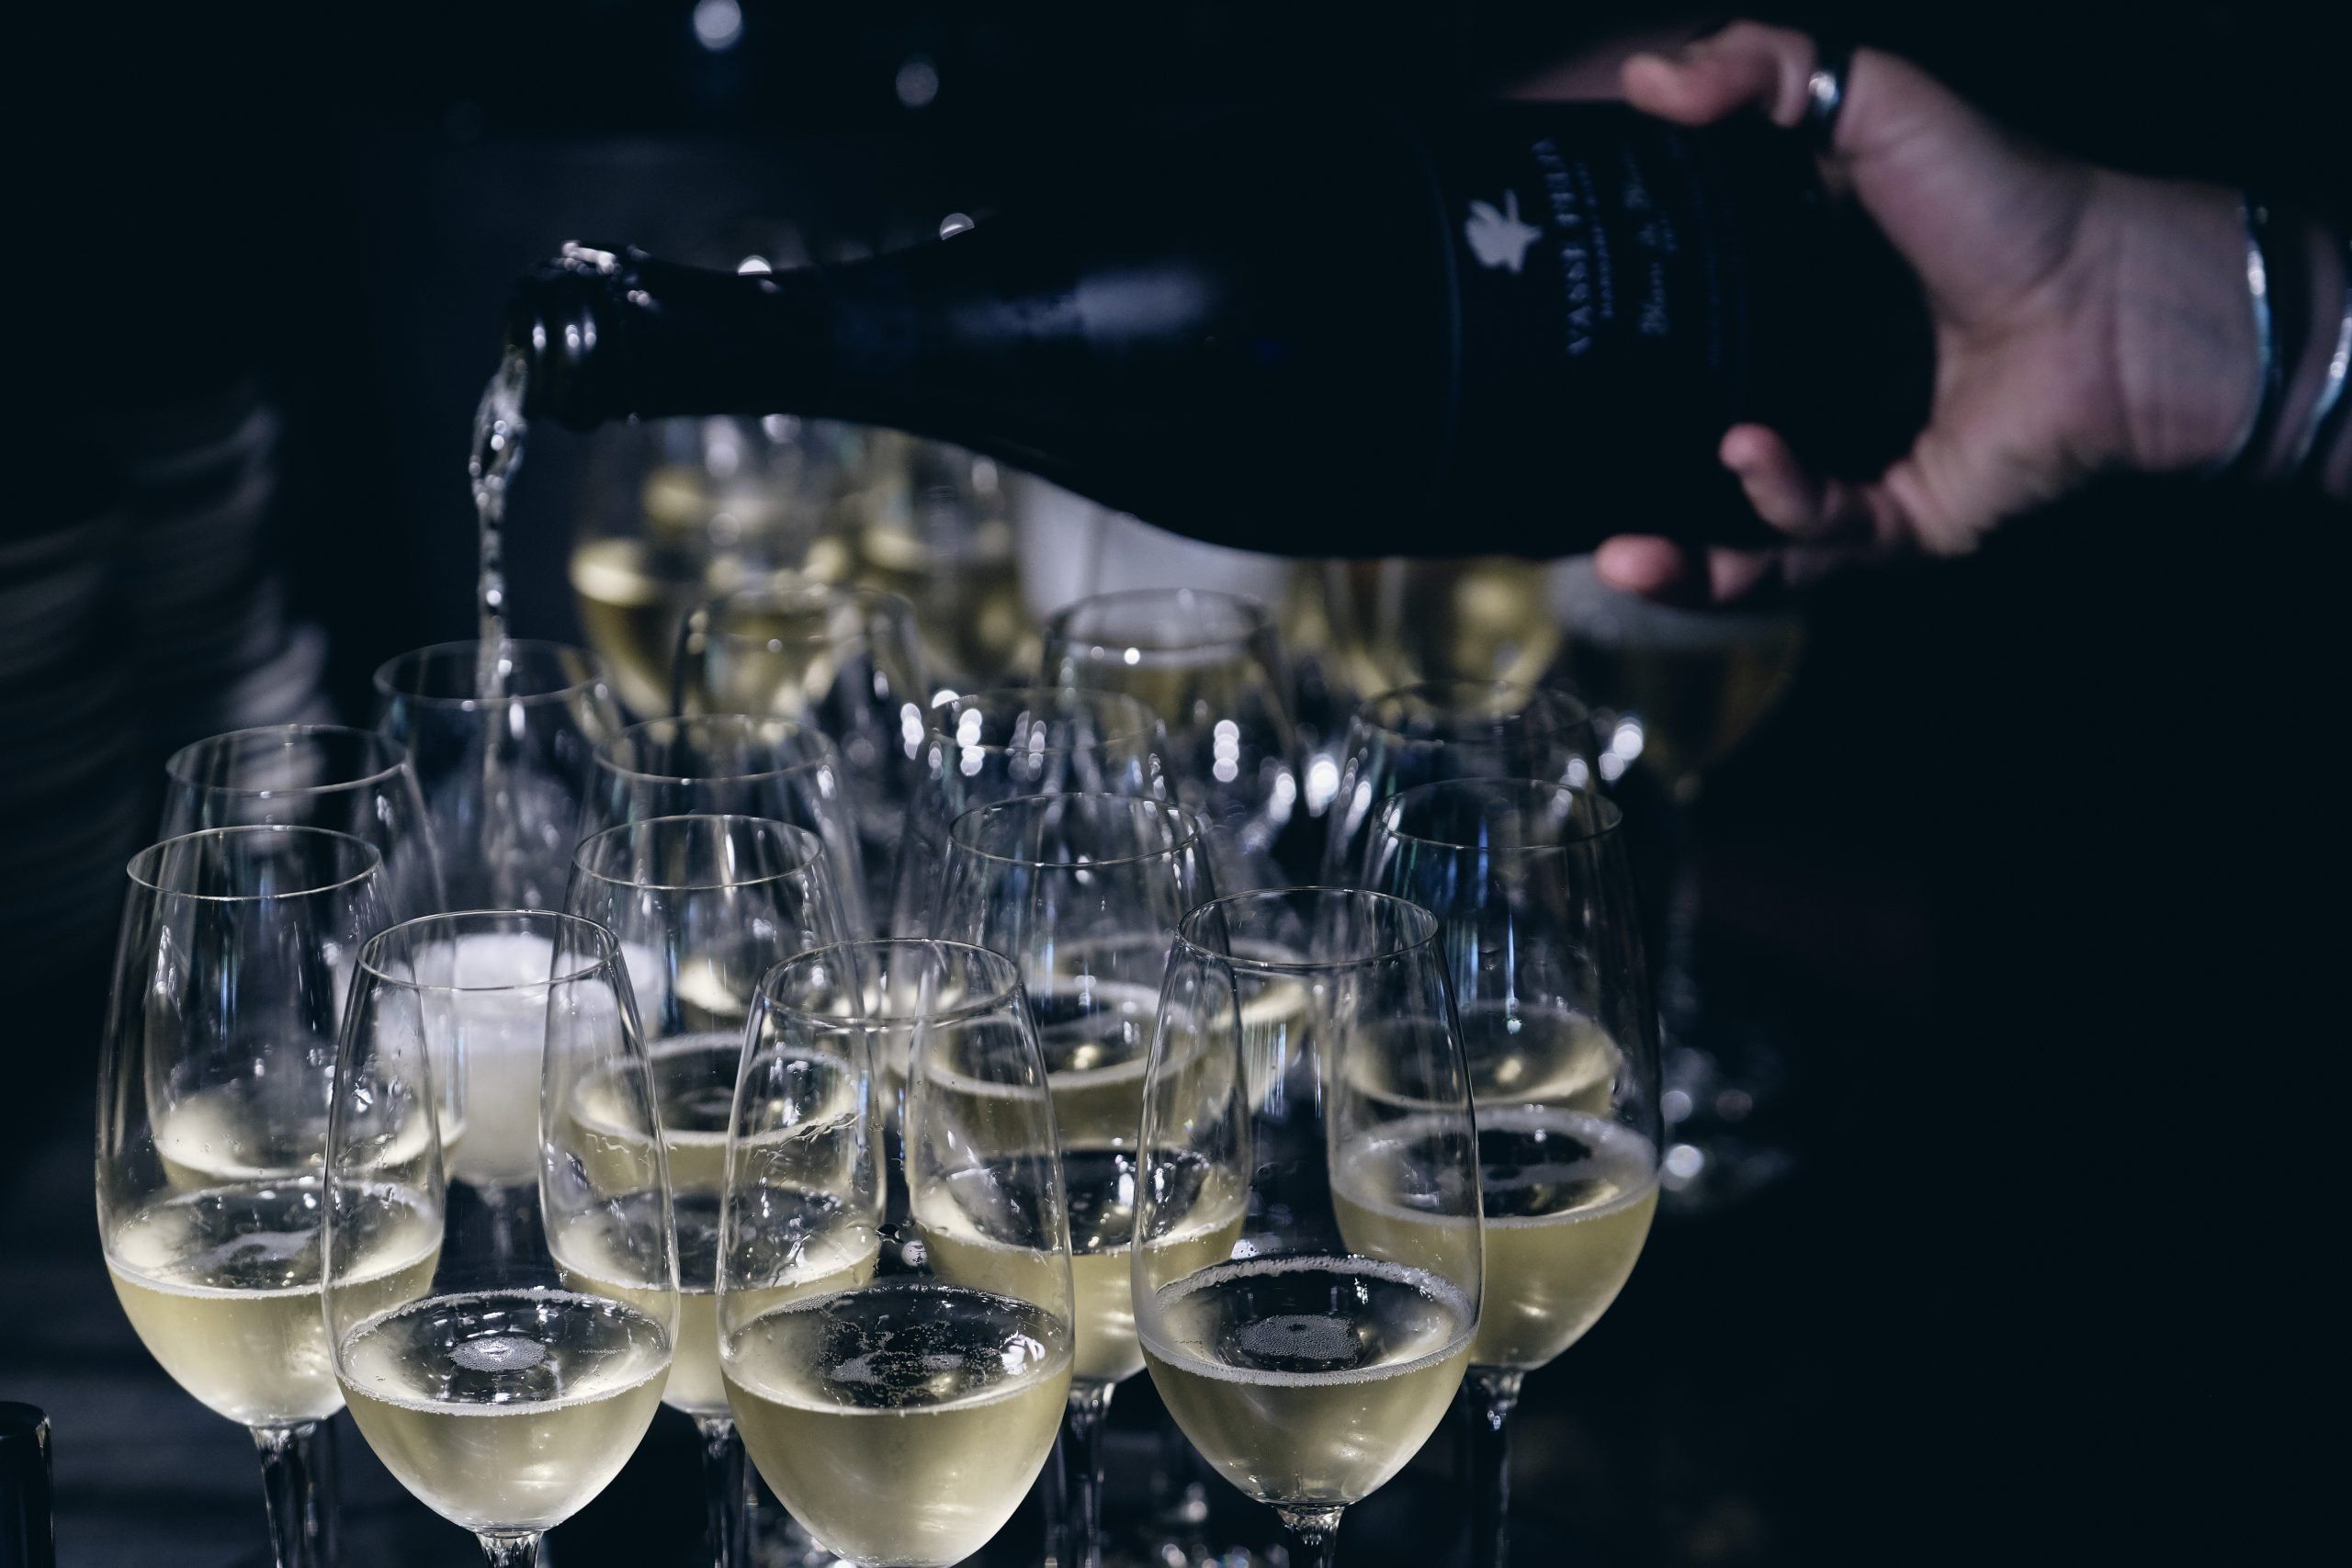 Sparkling wine is being poured into a group of wine glasses